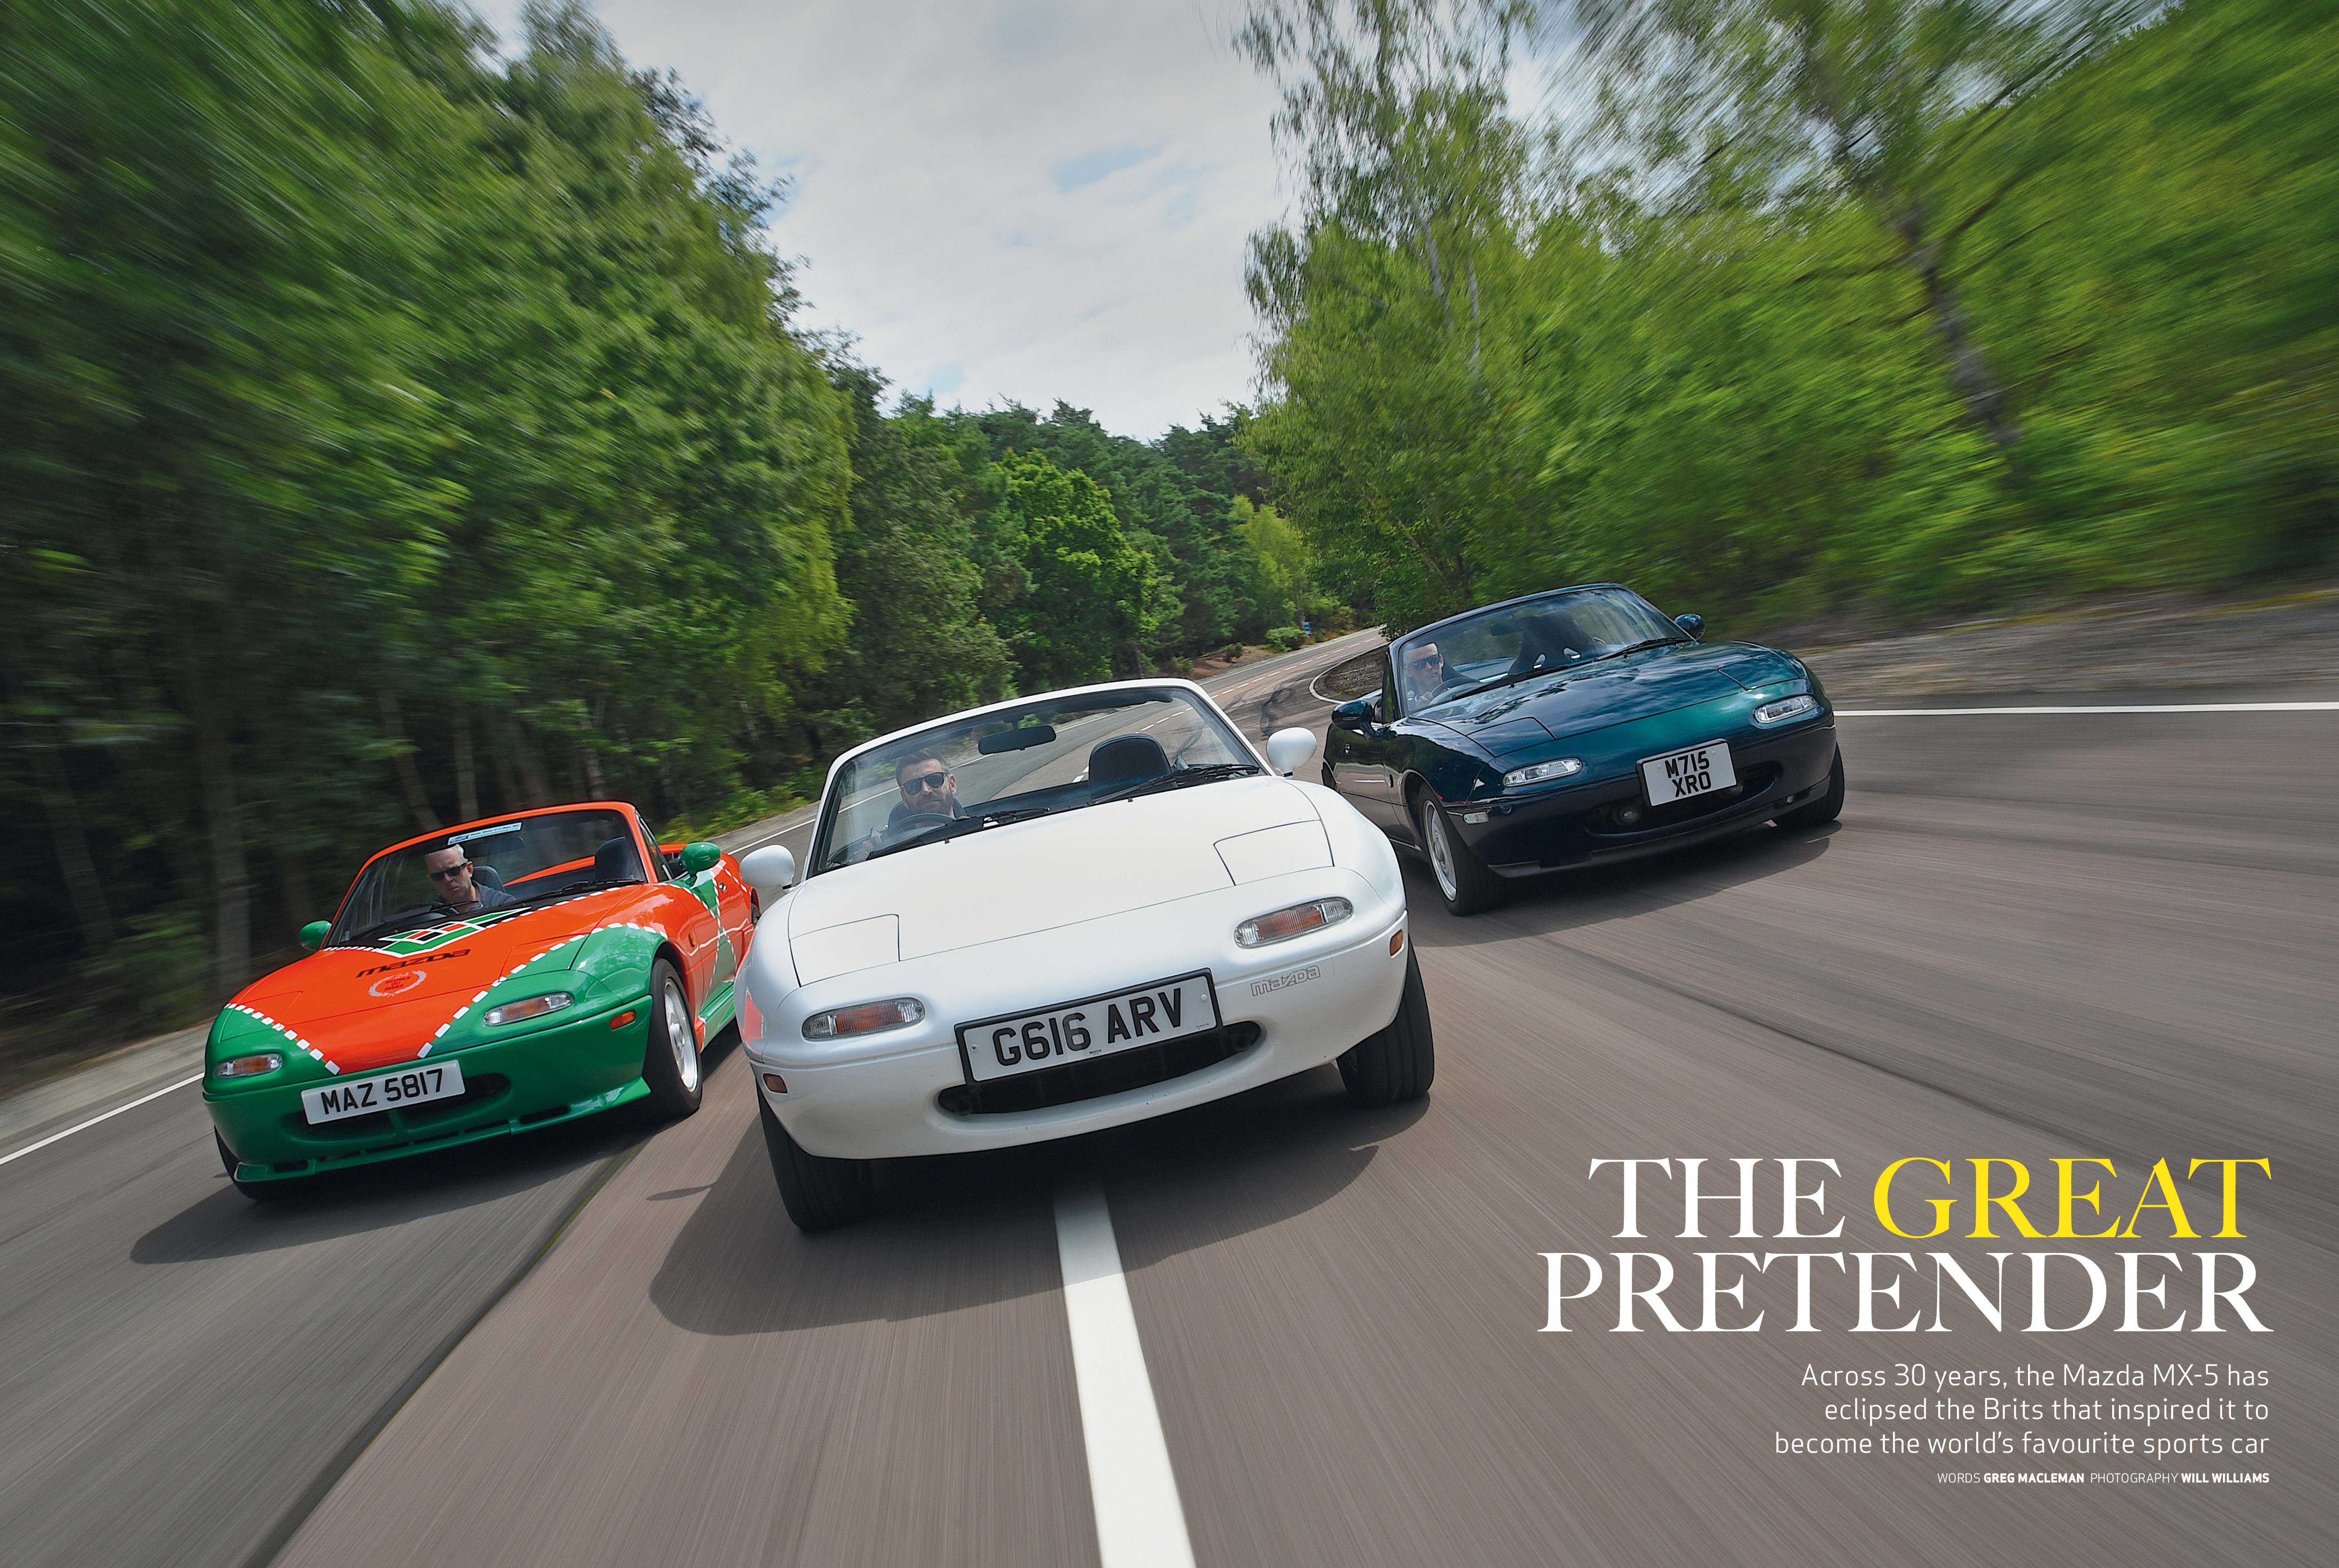 Classic & Sports Car – Mazda MX-5 at 30: Inside the October 2019 issue of C&SC